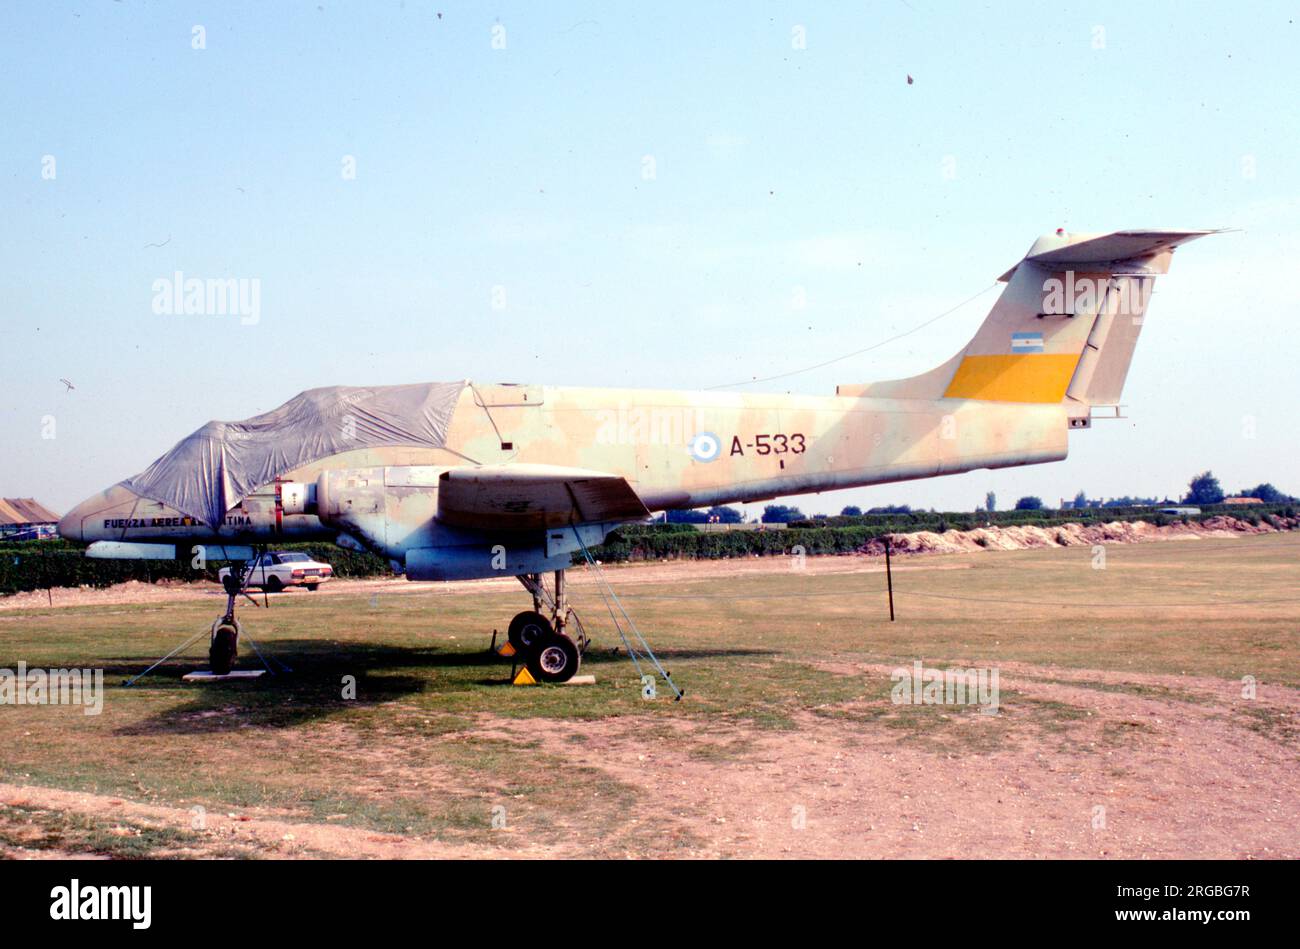 FMA IA-58 Pucara A-533 (msn 033), captured at RAF Stanley in 1982 and displayed at Middle Wallop after repatriation to the UK, Stock Photo